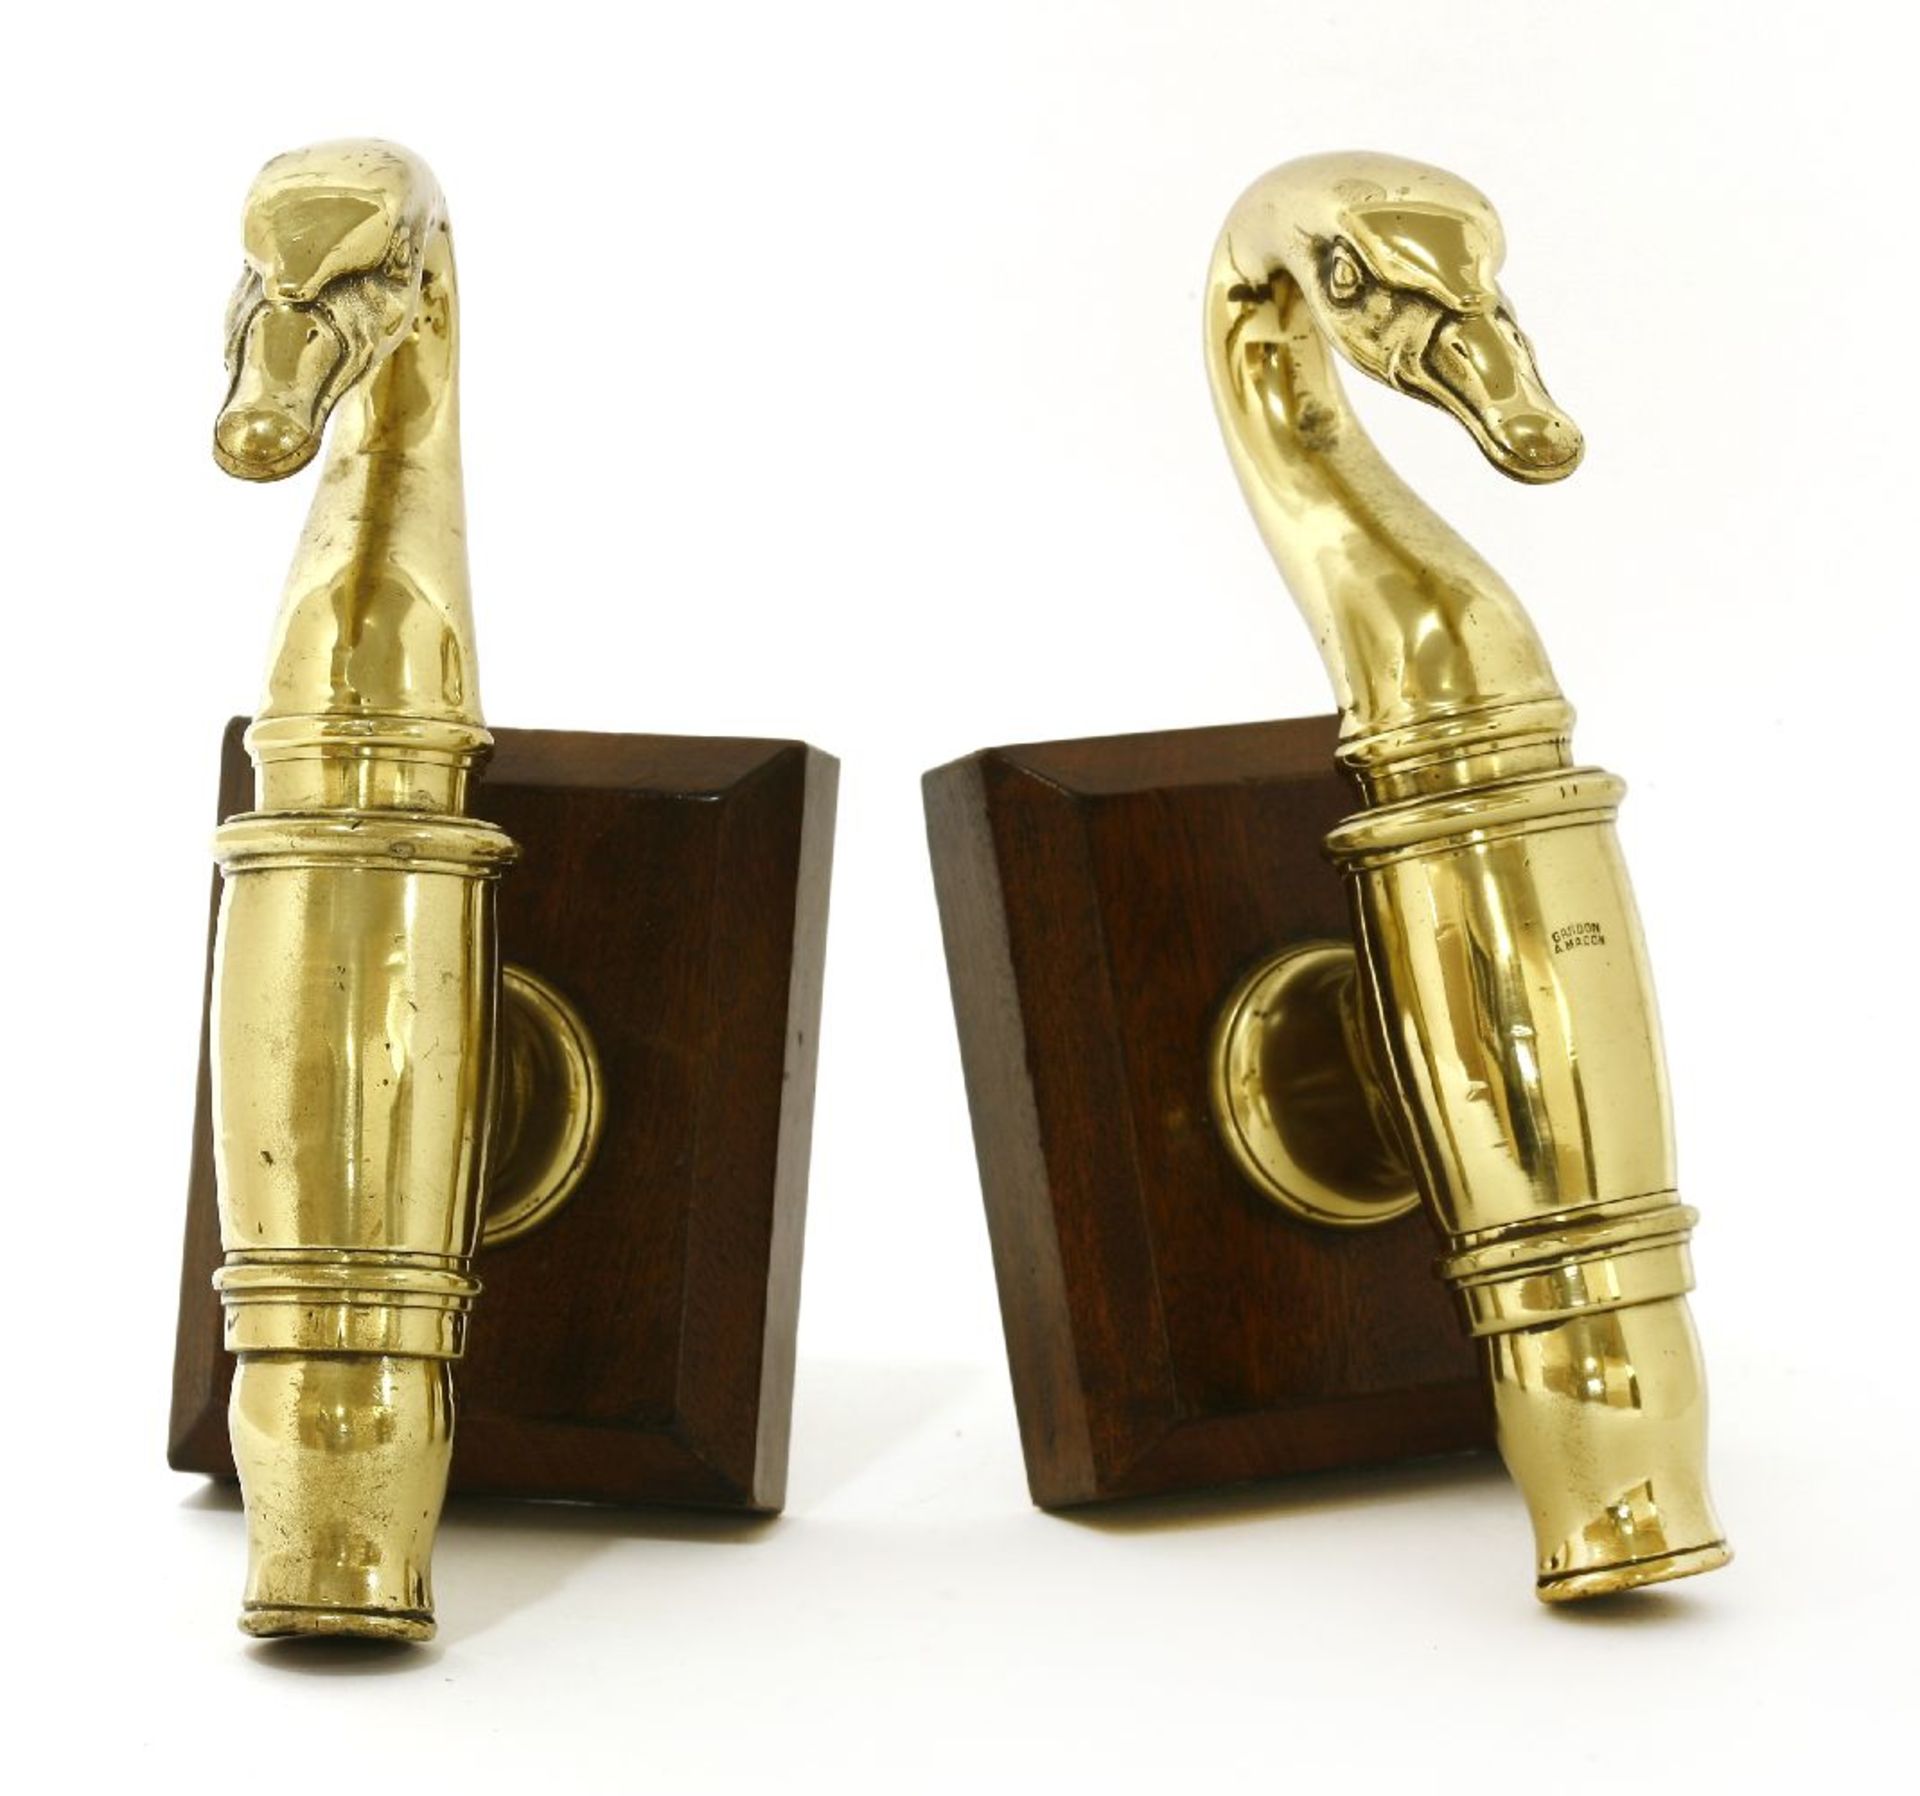 A pair of French polished brass taps,mid-19th century, each case in the form of a swan's head and